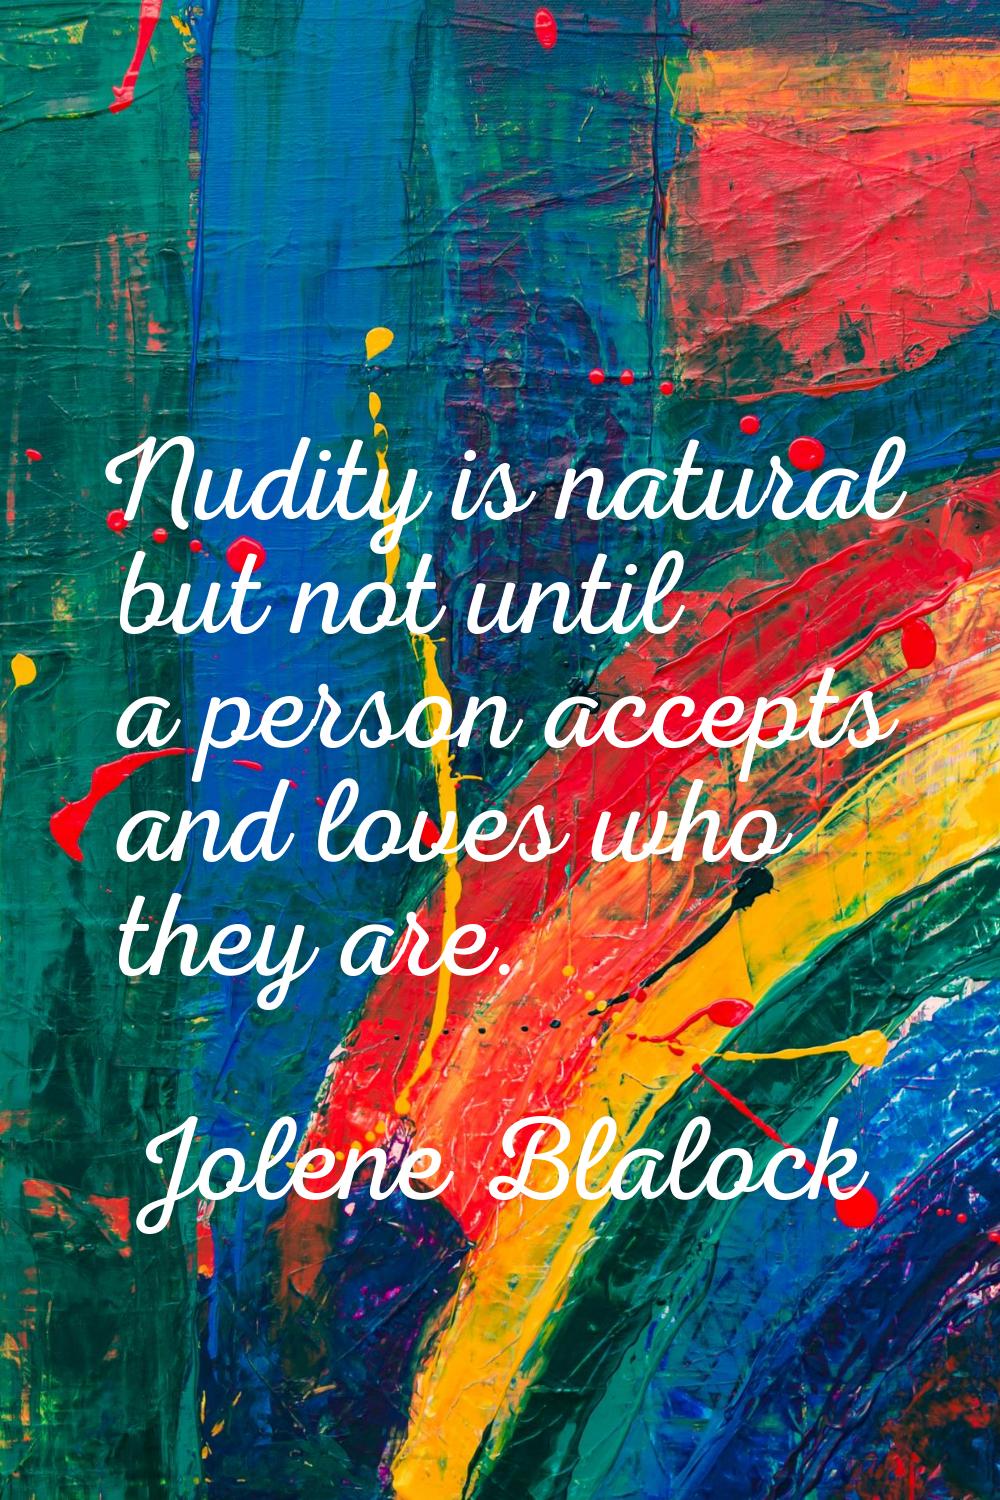 Nudity is natural but not until a person accepts and loves who they are.